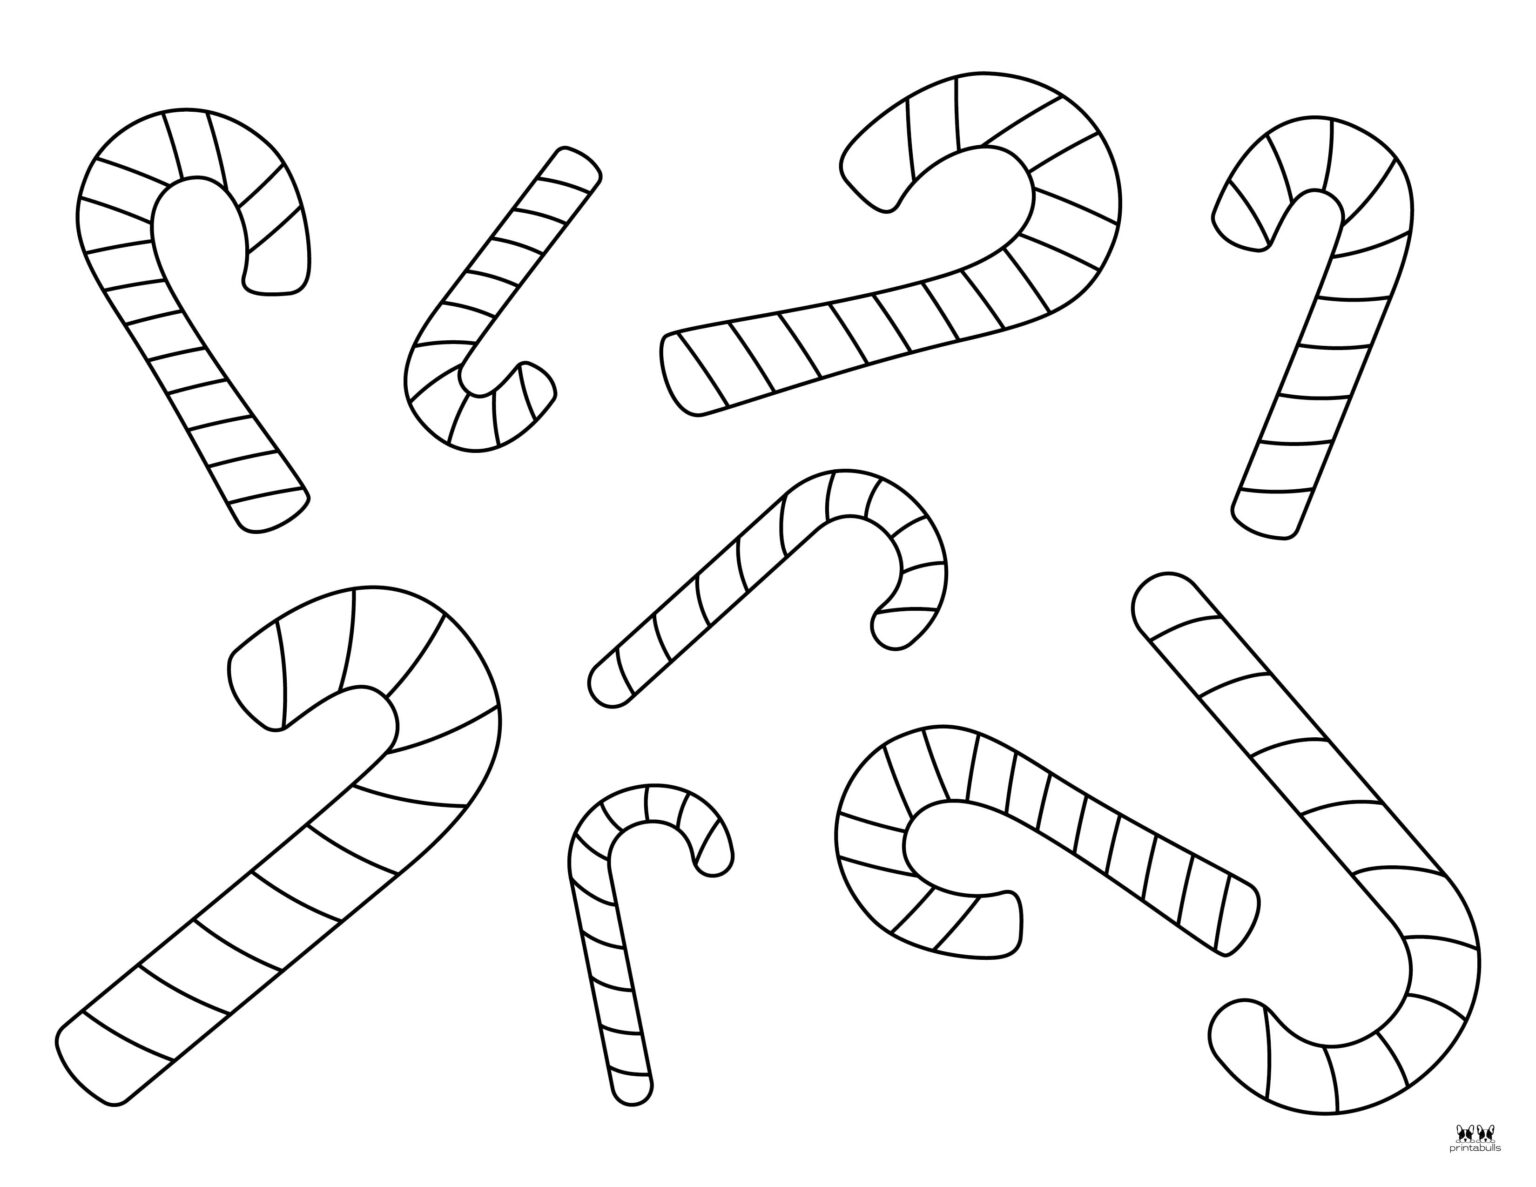 Candy Cane Coloring Pages & Templates - 35 Pages | Printabulls